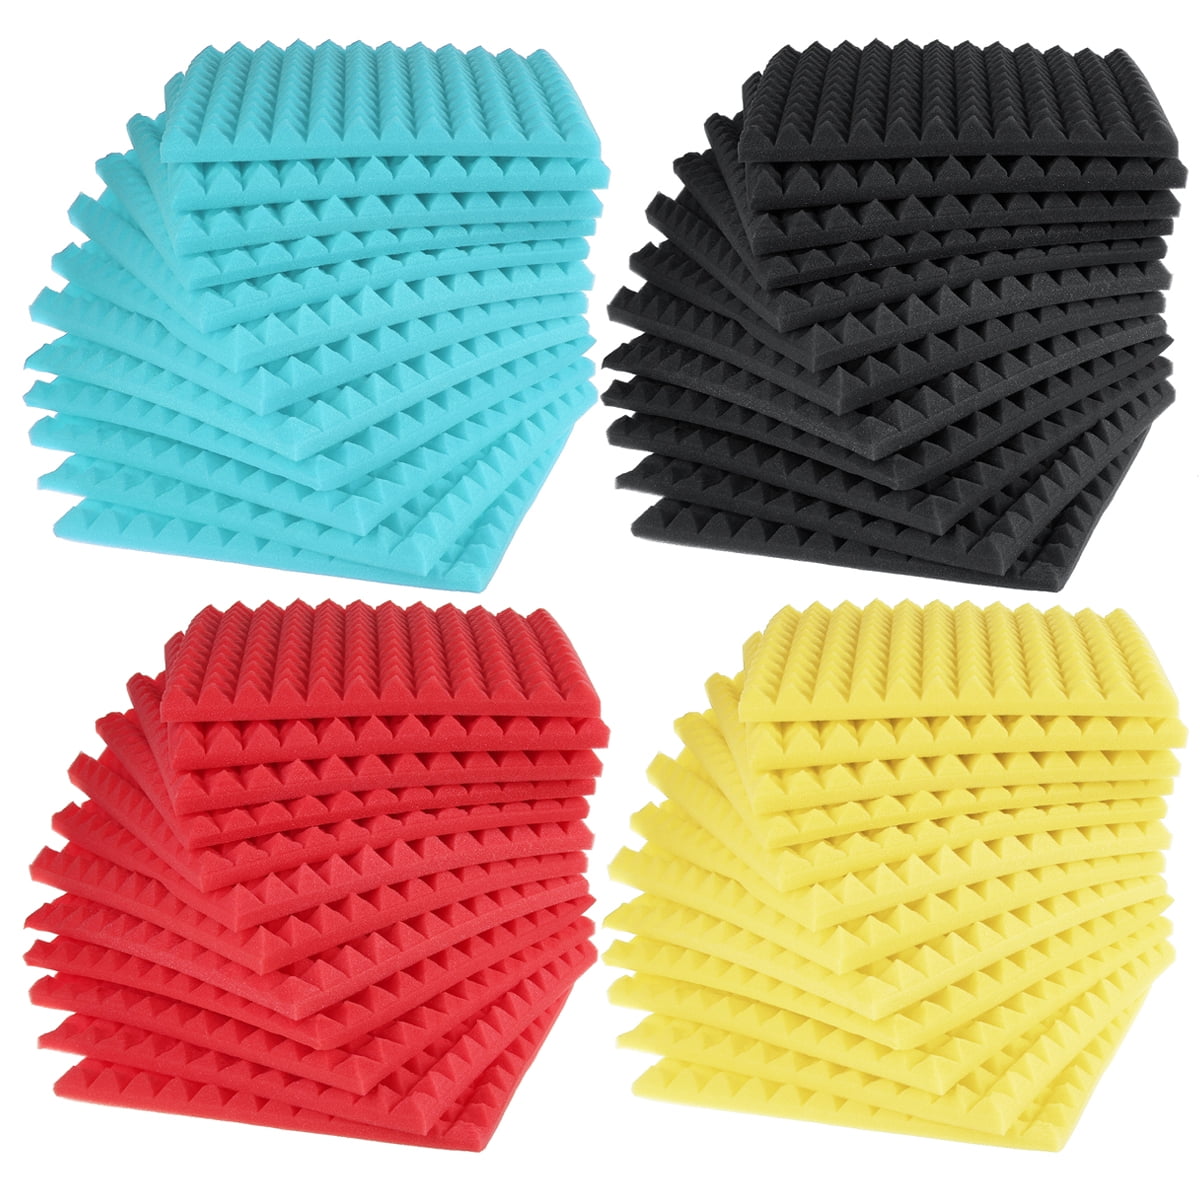 30x30x3cm 12x12x1 inches Acoustic Soundproofing Sound-Absorbing Noise Foam Tiles 